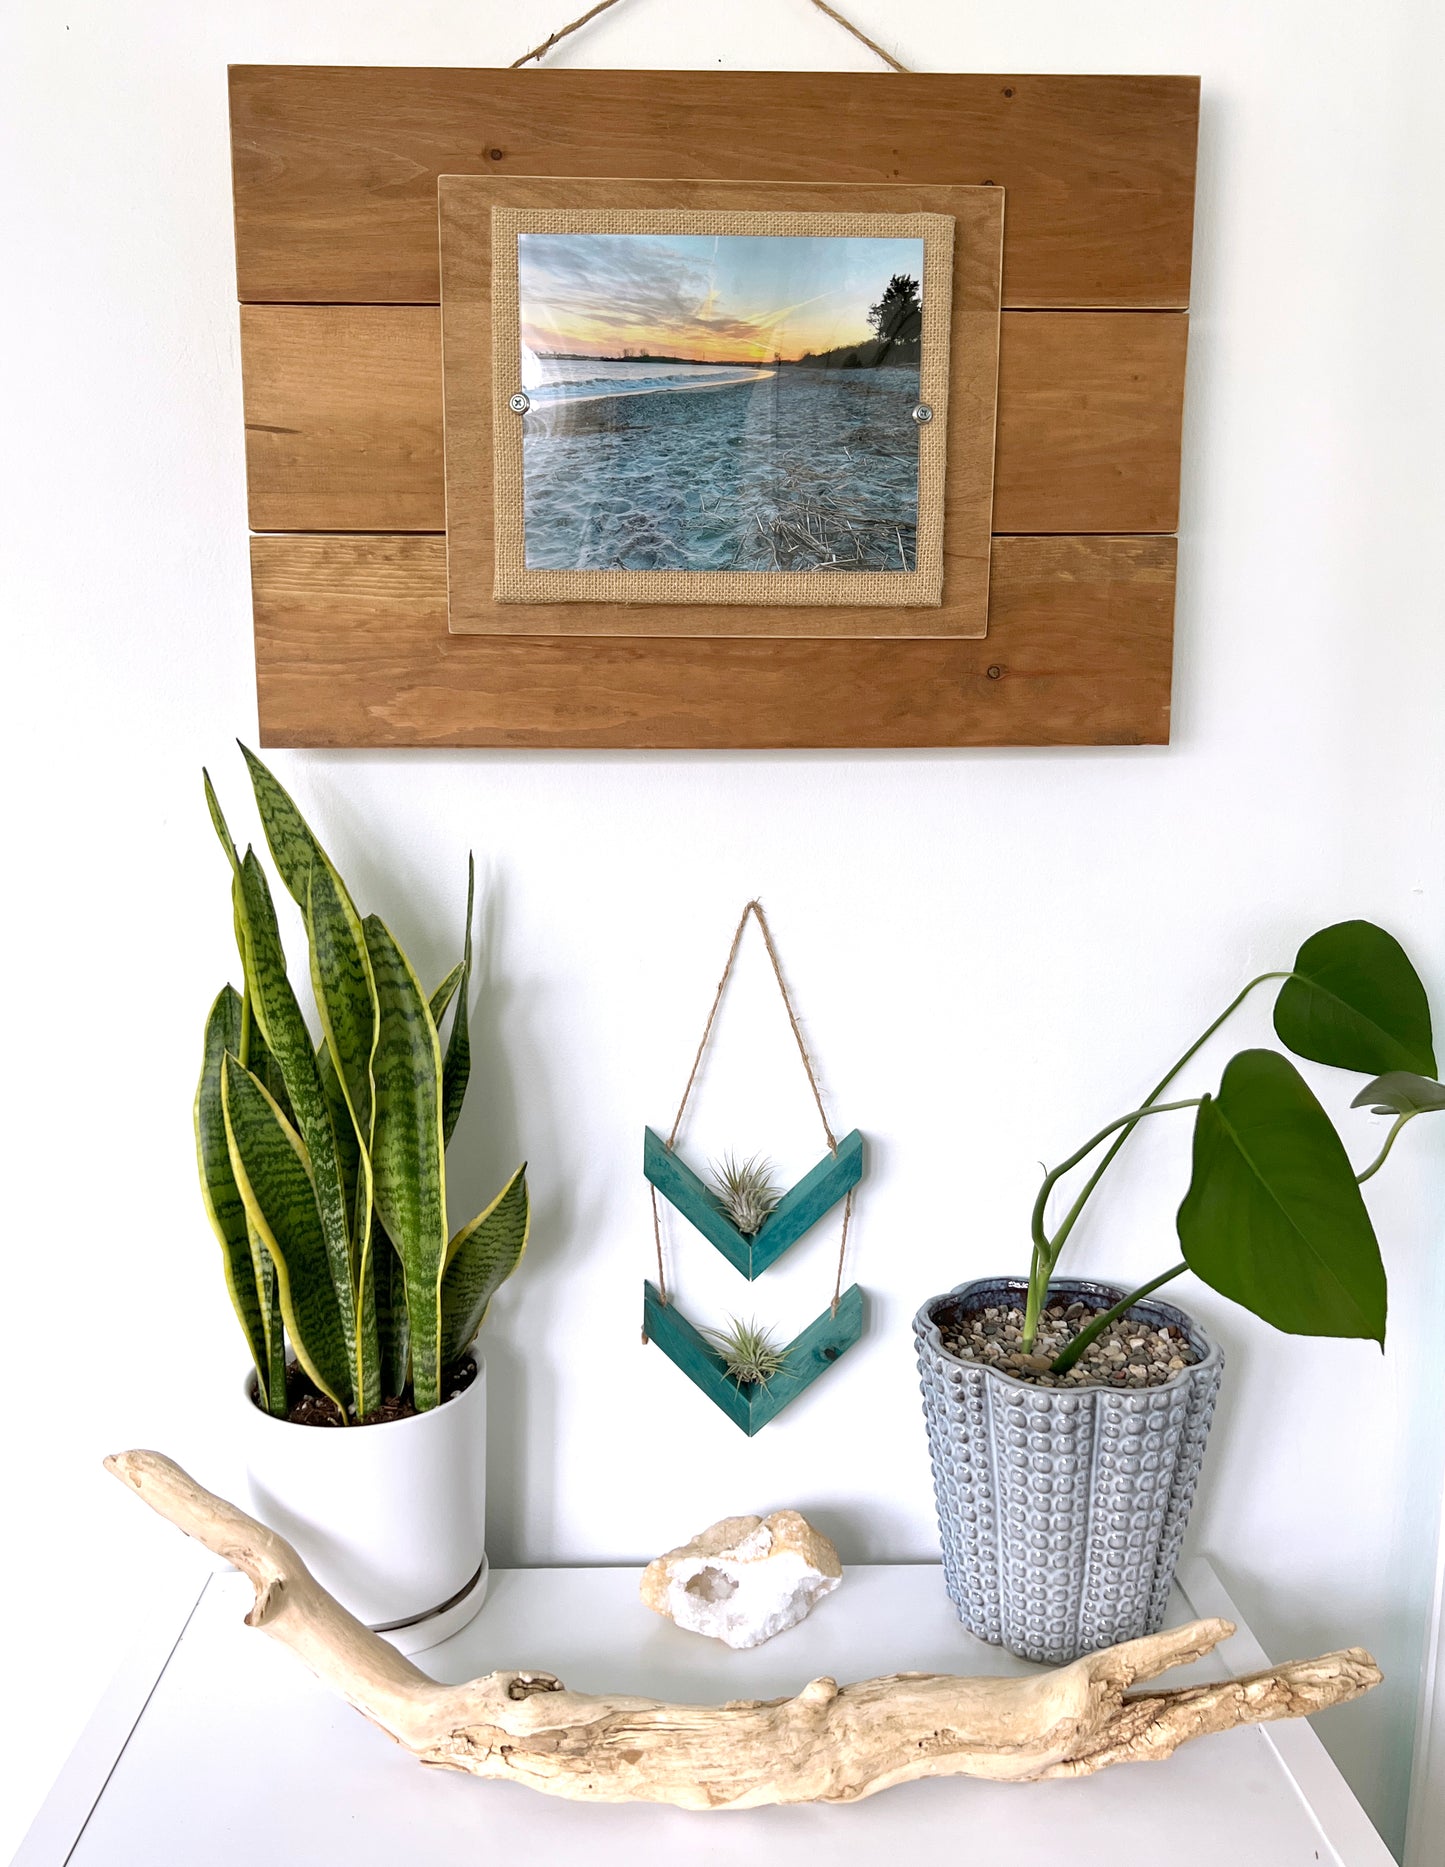 Wood Chevron Air Plant Holder, Wall Hanging Angled Modern Boho Design, Gift Idea, Plant Lovers, Present for Mom, Great way to display plants